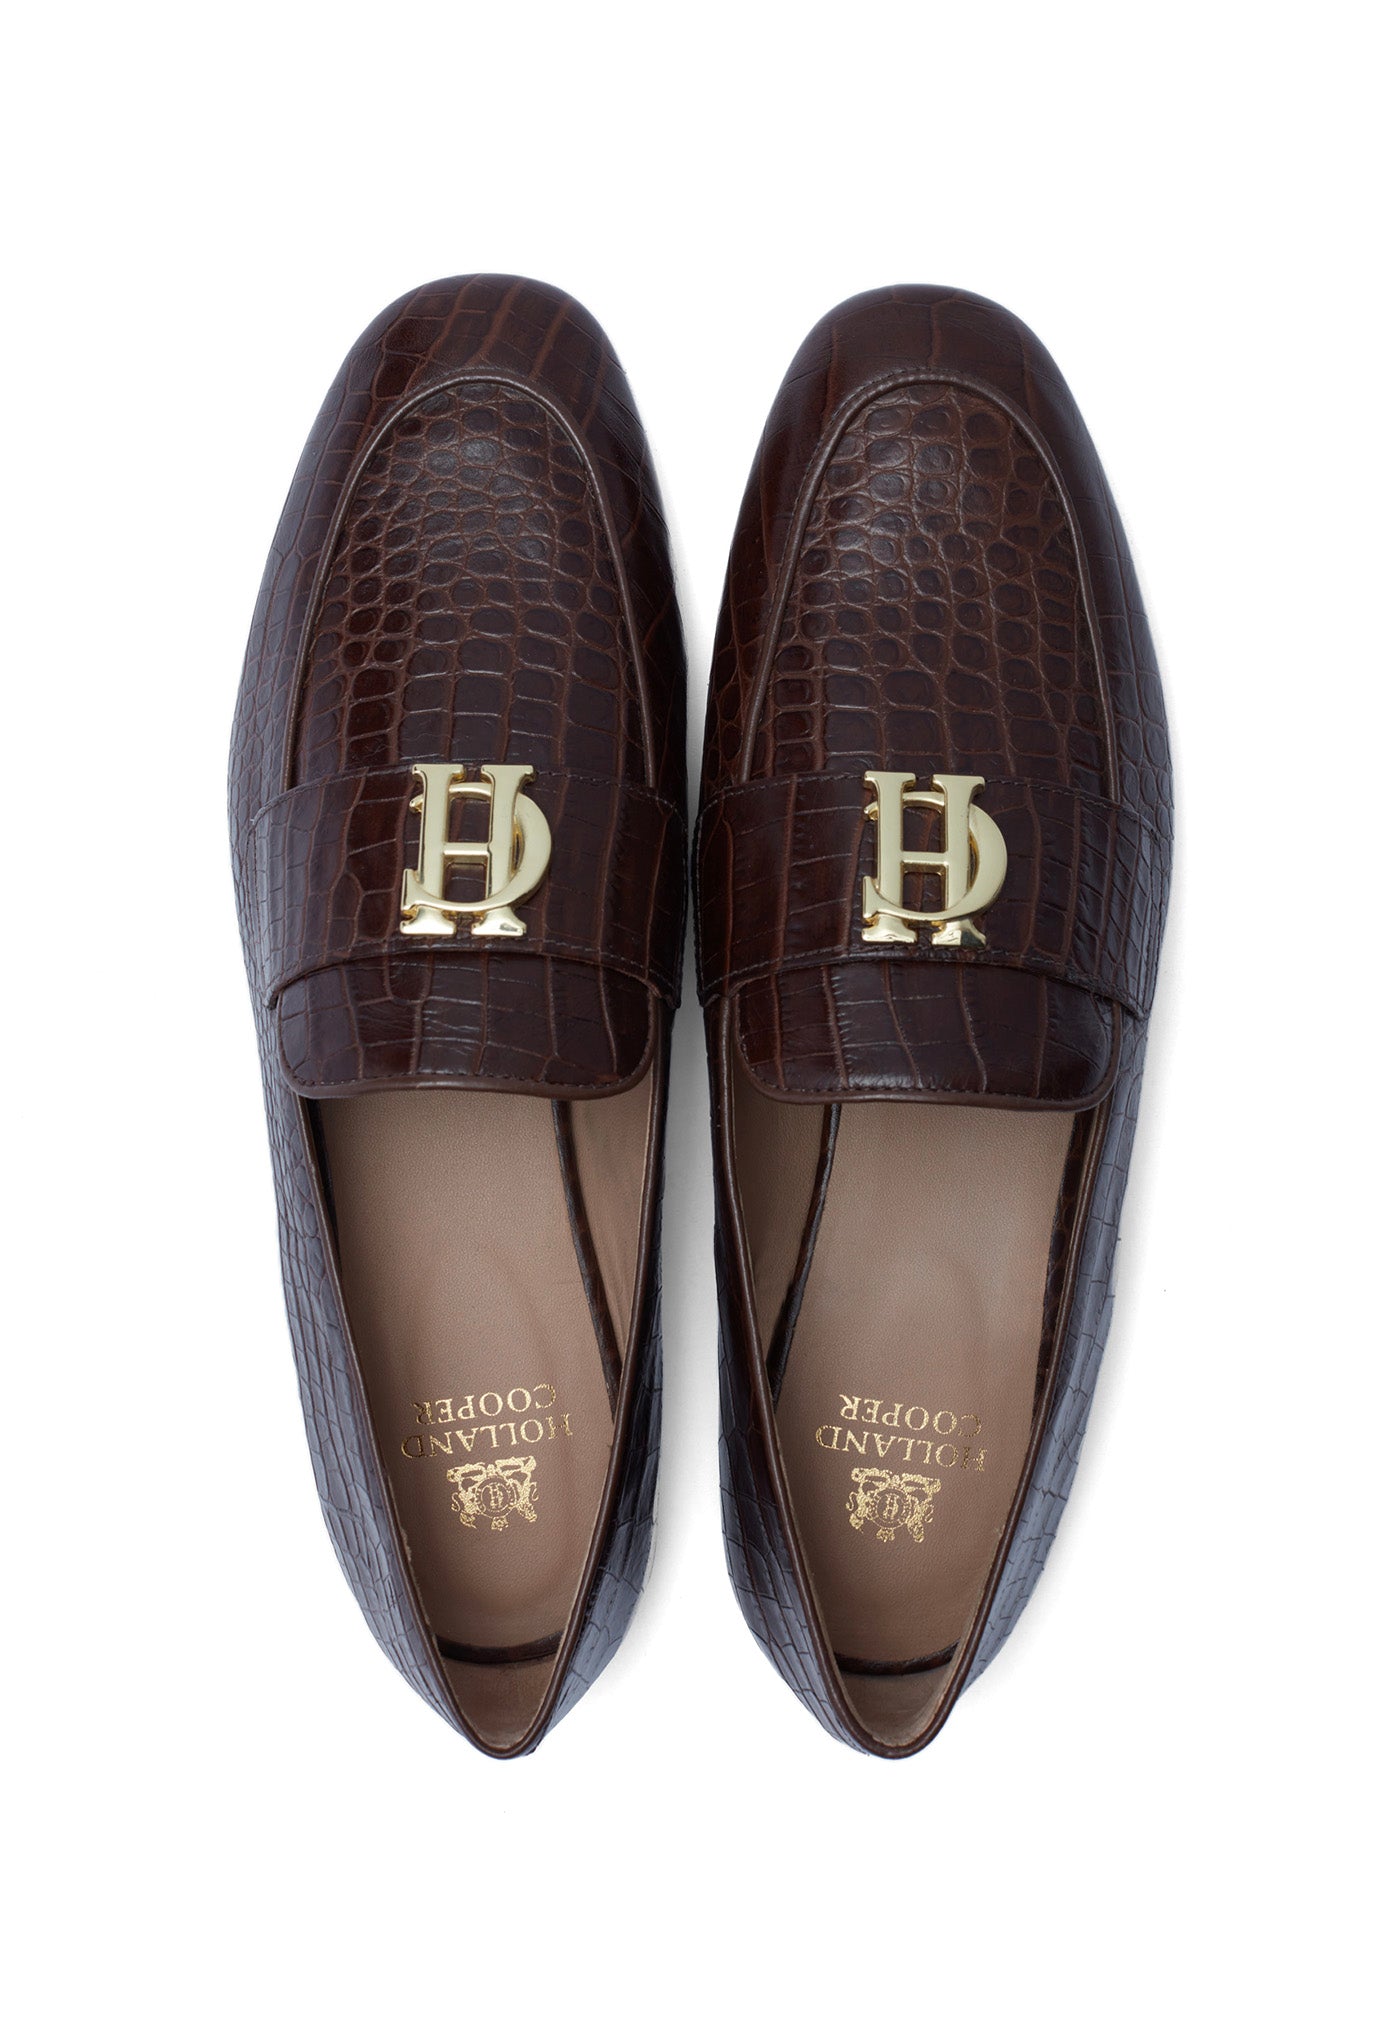 Harvard Loafer - Chocolate Croc sold by Angel Divine